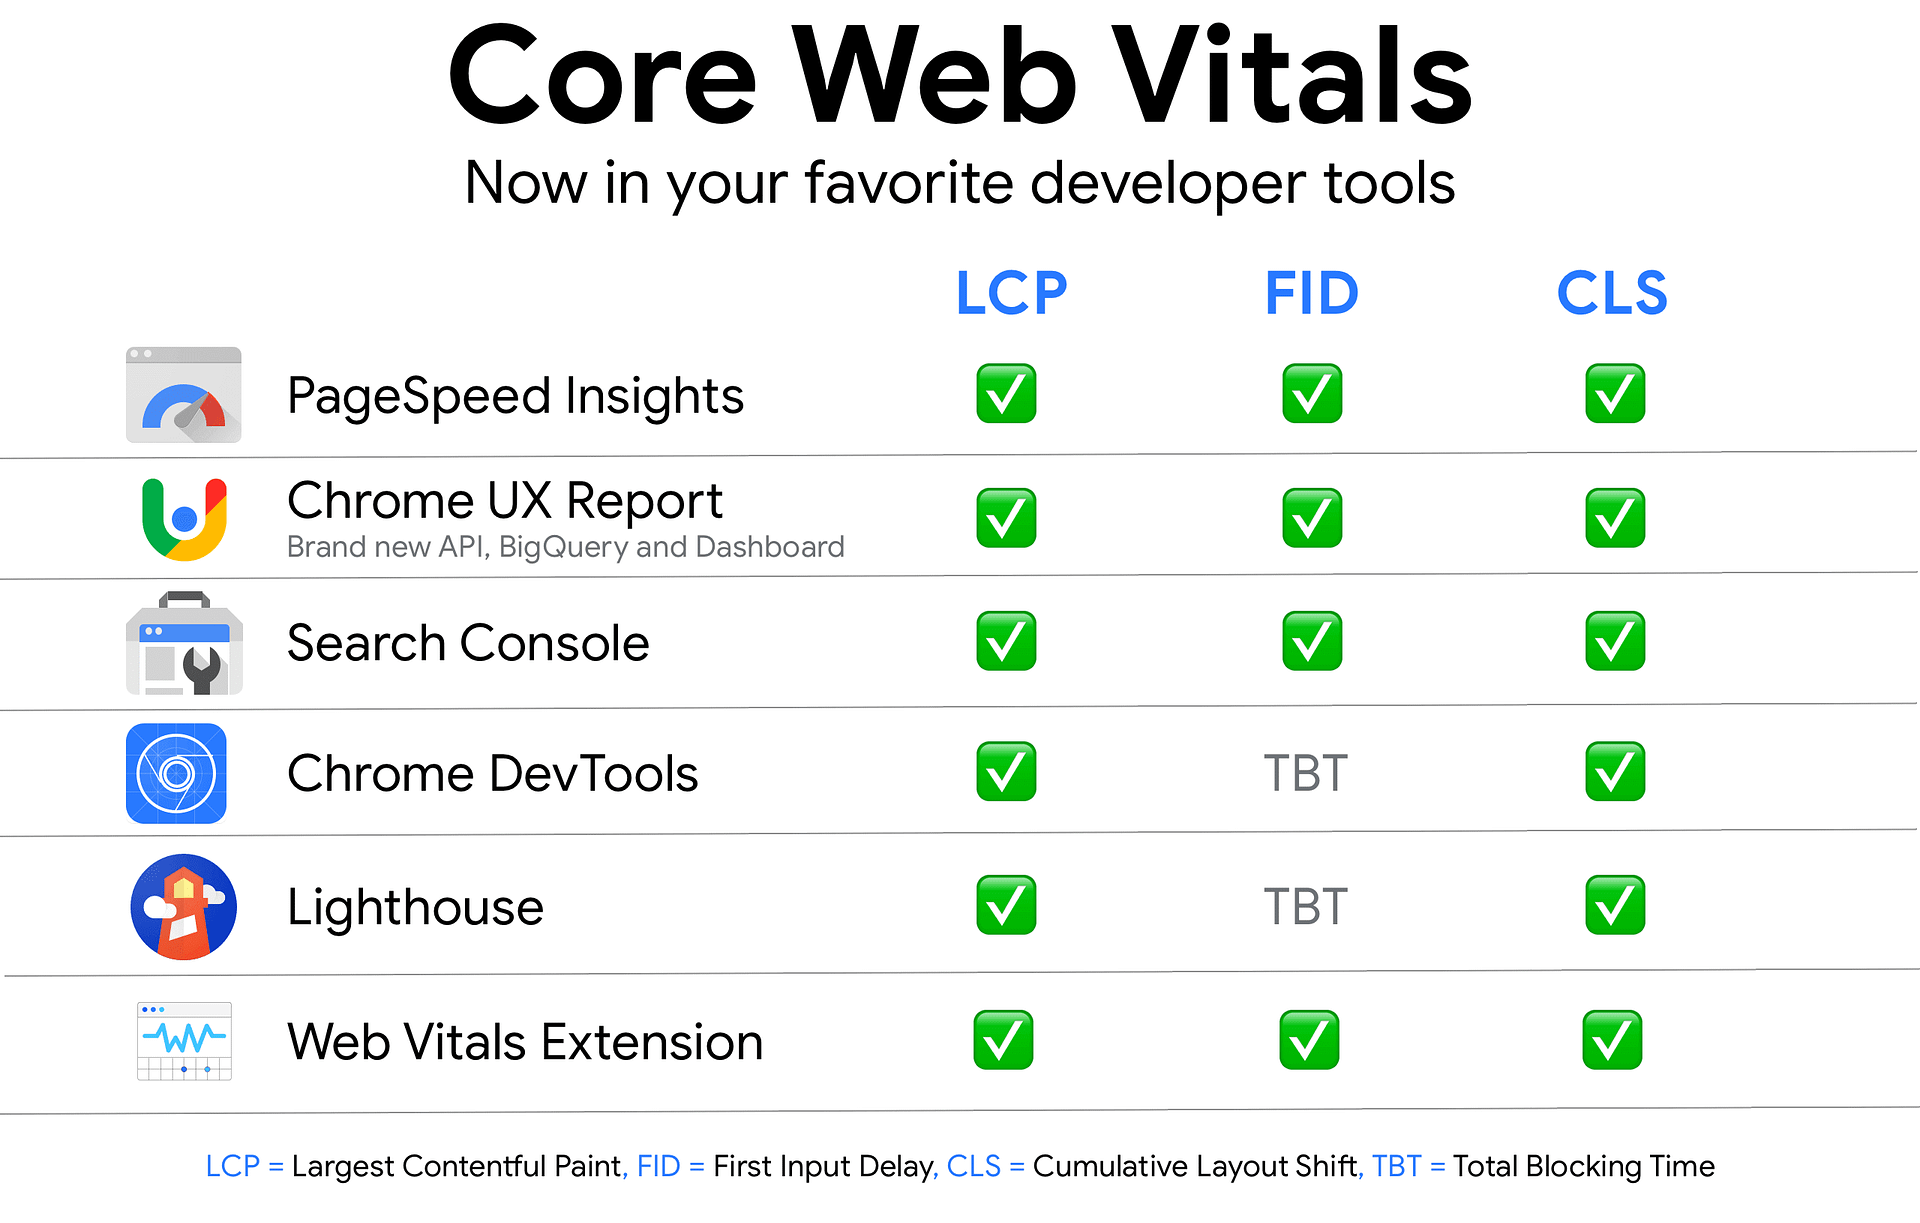 core web vitals tools now in your favourite developer tools where you can measure your core web vitals